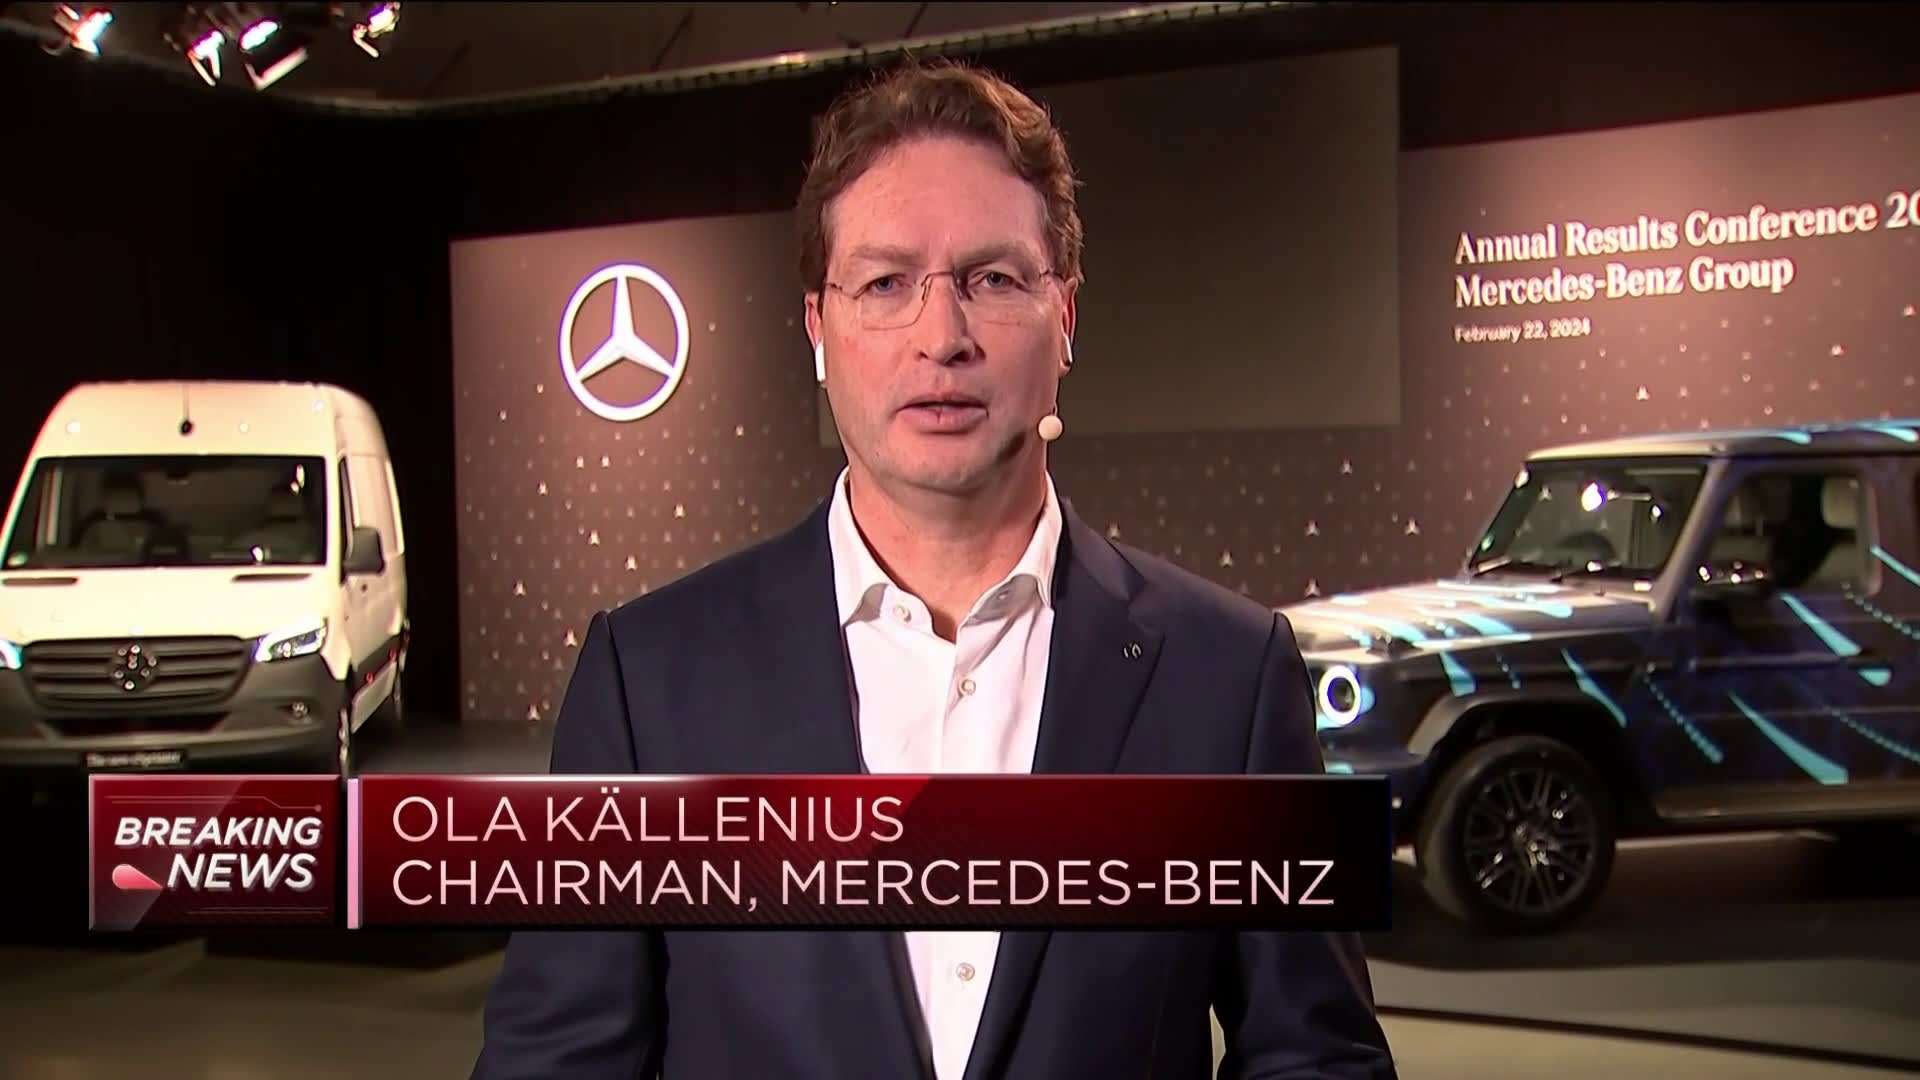 Mercedes-Benz is working through supply chain challenges, CEO says